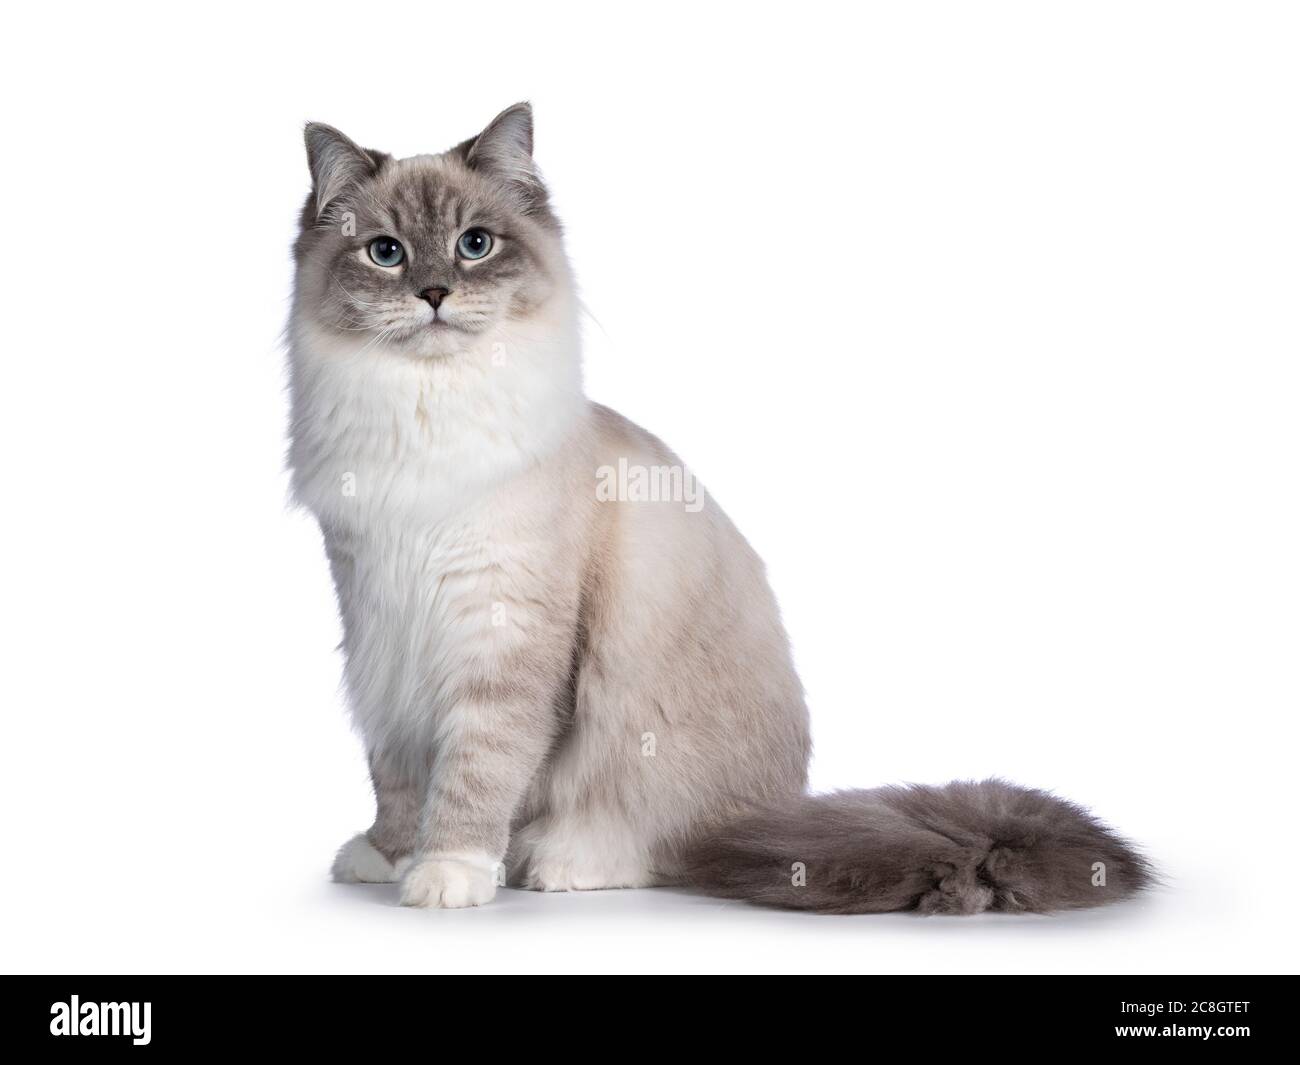 Pretty Neva Masquerade cat sitting side ways. Looking straight to camera with light blue eyes. Isolated on a black background. Bushy tail behind body. Stock Photo